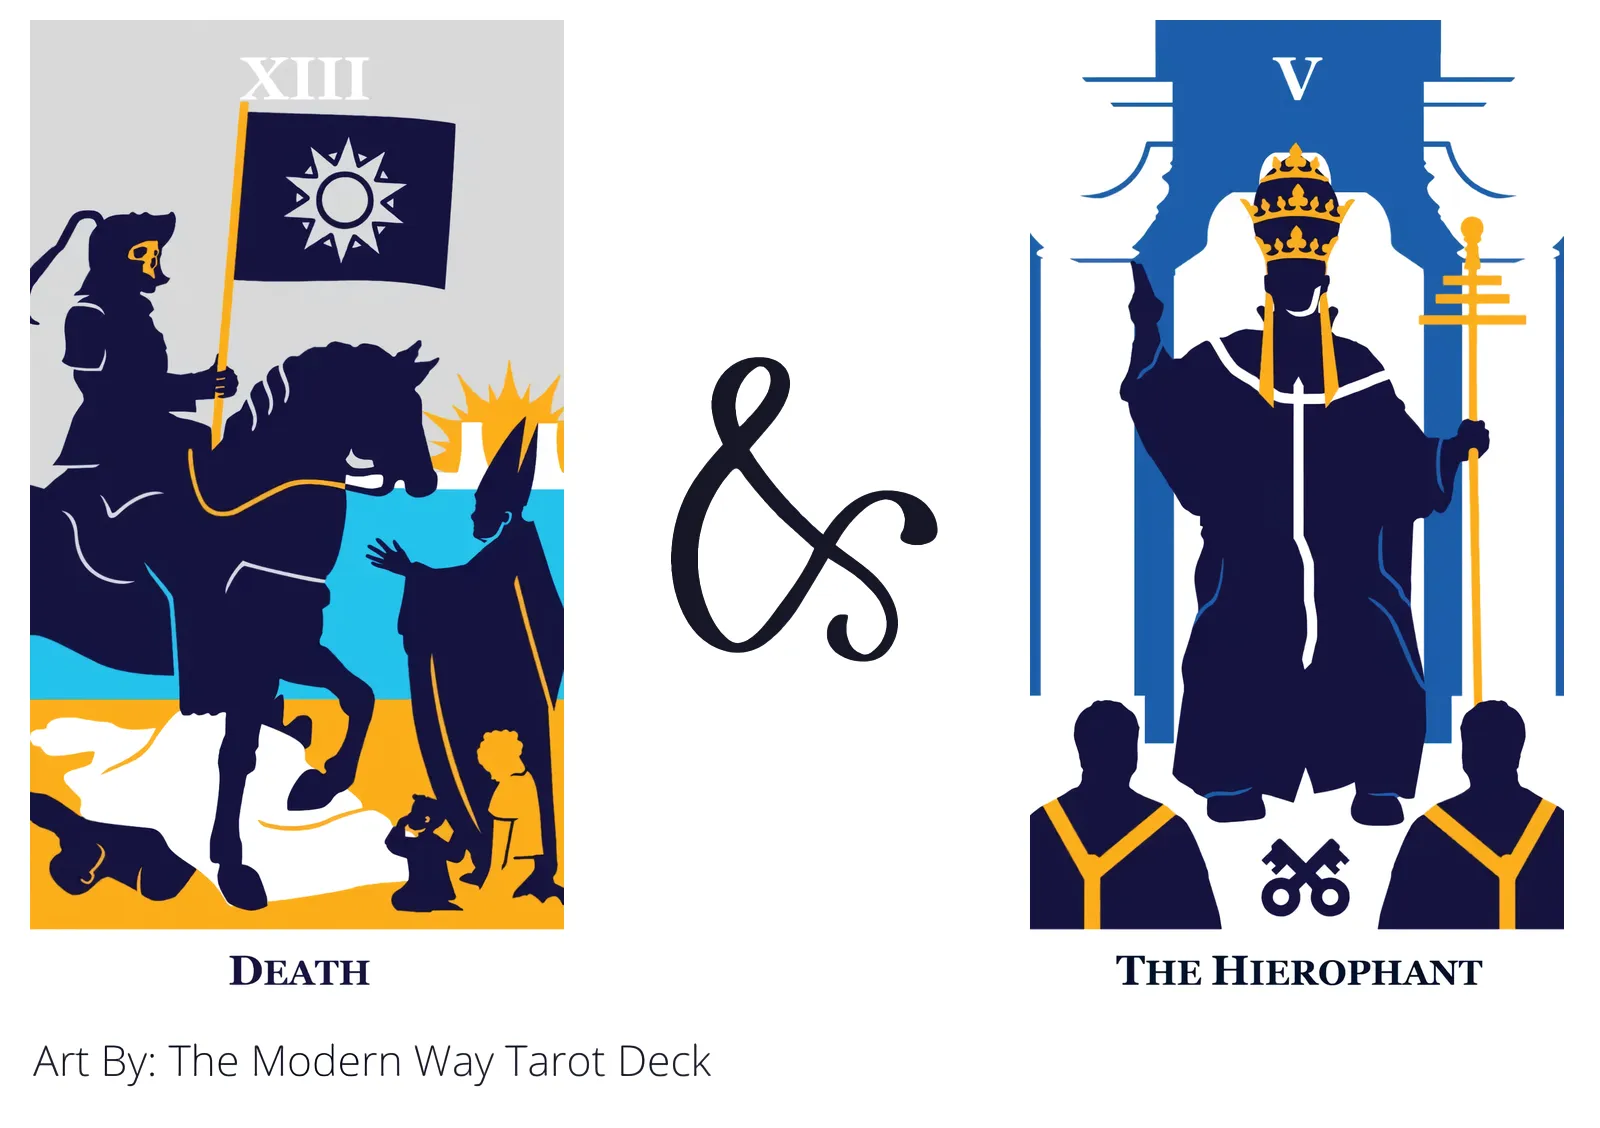 death and the hierophant tarot cards together